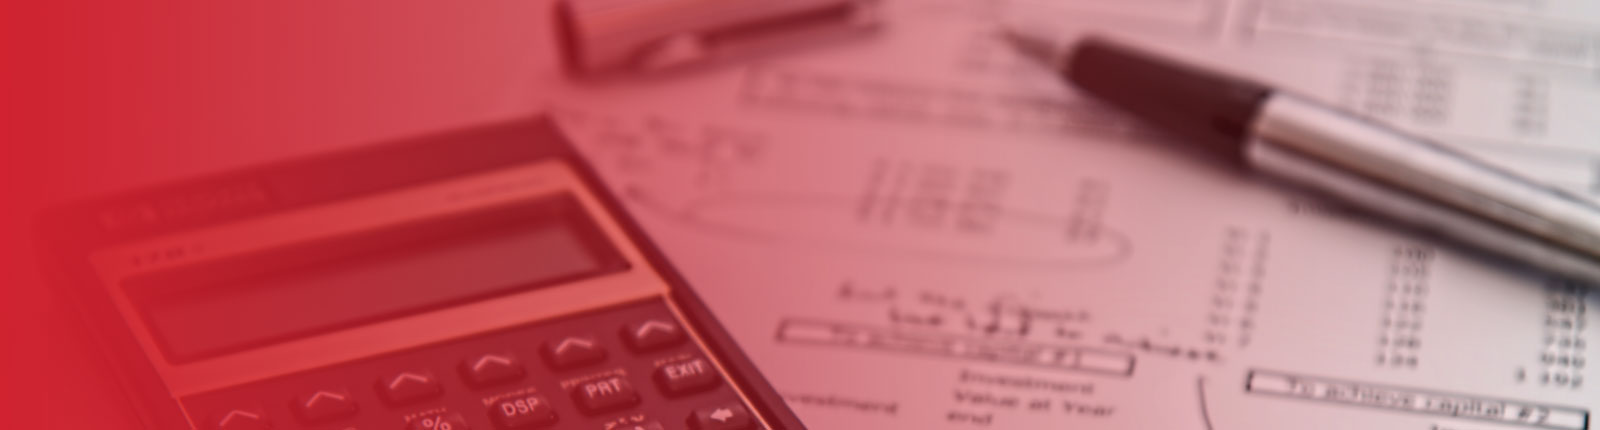 calculator beside financial reports with pen